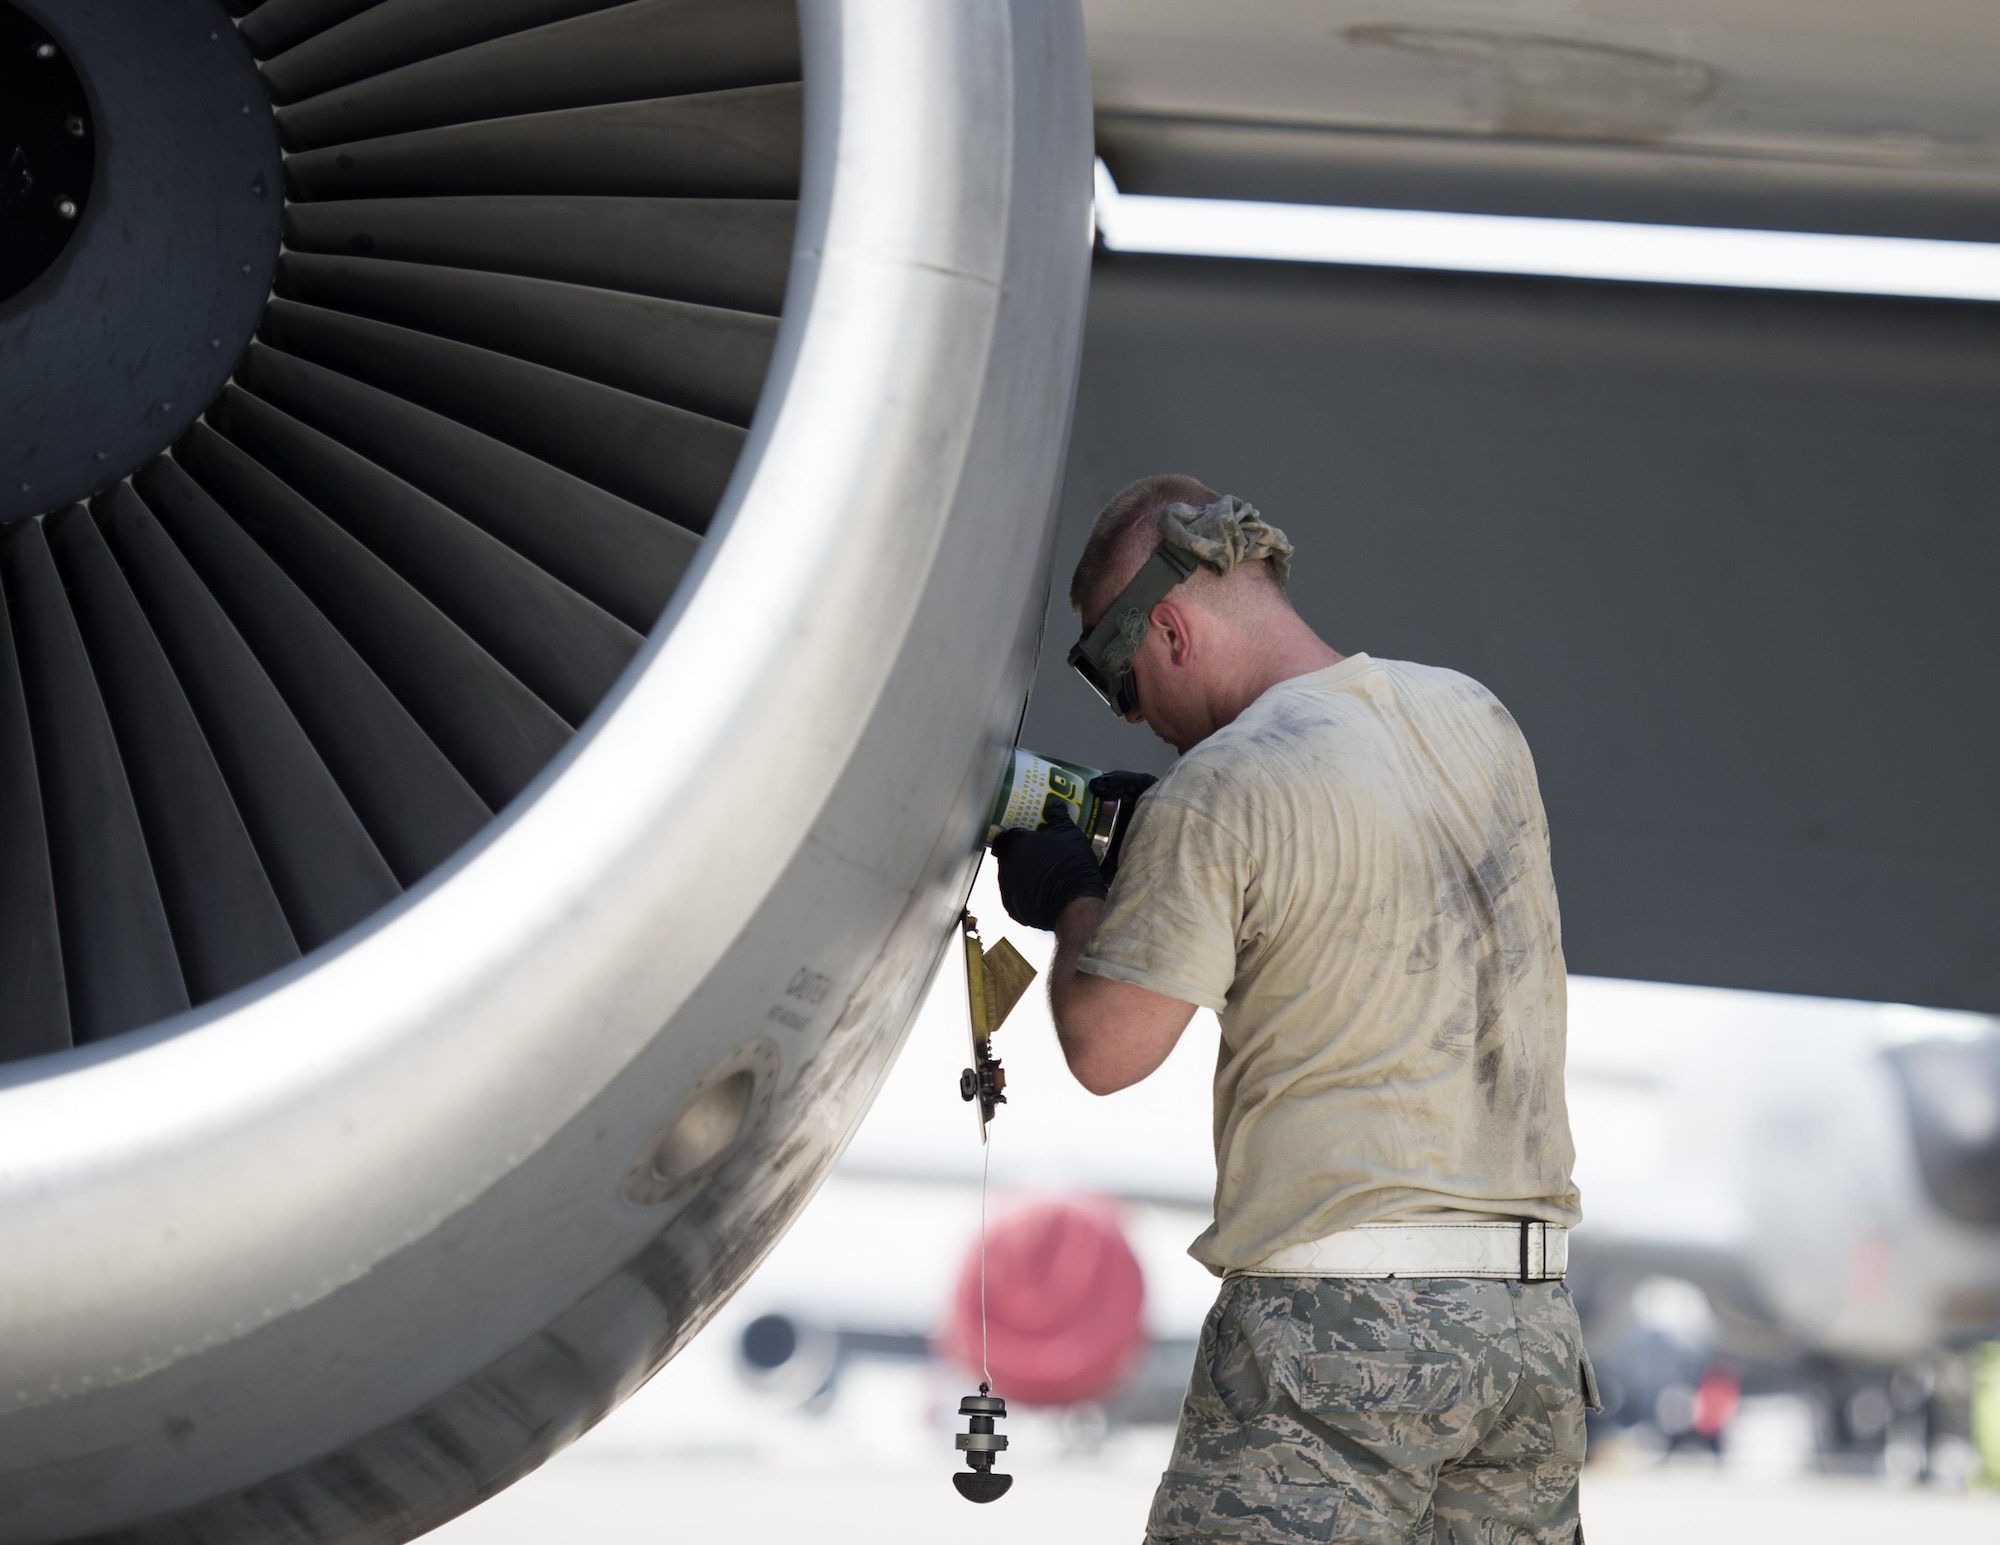 U.S Air Force crew chief with the 340th Expeditionary Aircraft Maintenance Unit places oil into an engine on a KC-135 Stratotanker at Al Udeid Air Base, Qatar, June 30, 2017.  The KC-135 Stratotanker provides aerial refueling support to U.S. and coalition aircraft 24/7 throughout the U.S. Central Command area of responsibility. (U.S. Air Force photo by Tech. Sgt. Amy M. Lovgren)